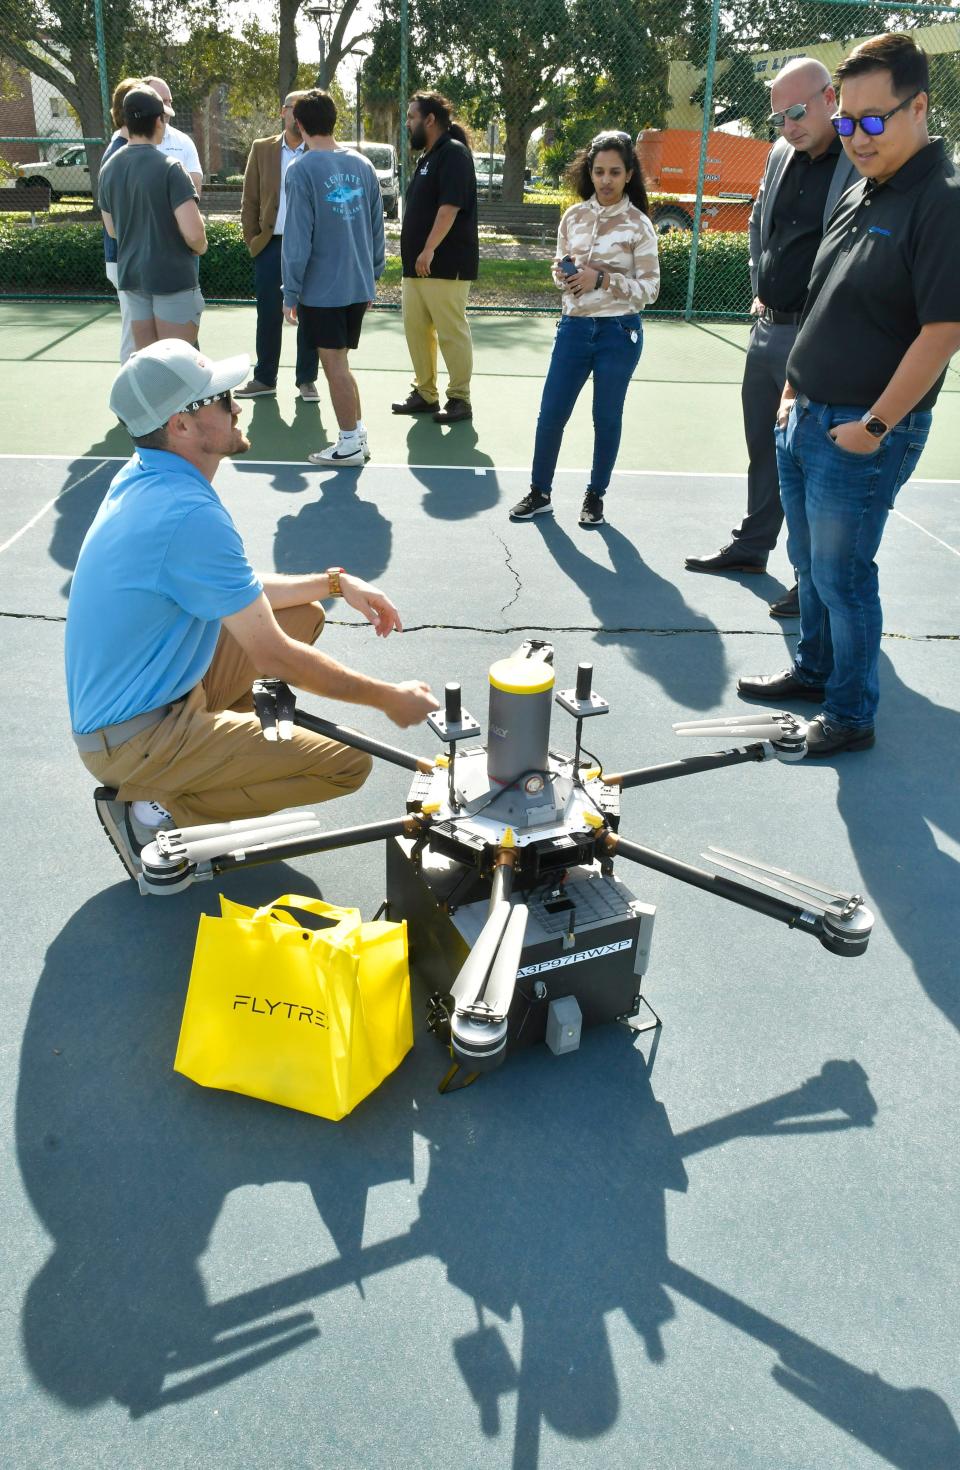 Paul Rossi, Causey Aviation Unmanned director of development and safety, discusses the Flytrex hexacopter after Thursday's drone flight during Florida Tech's Advanced Air Mobility Technology Showcase.